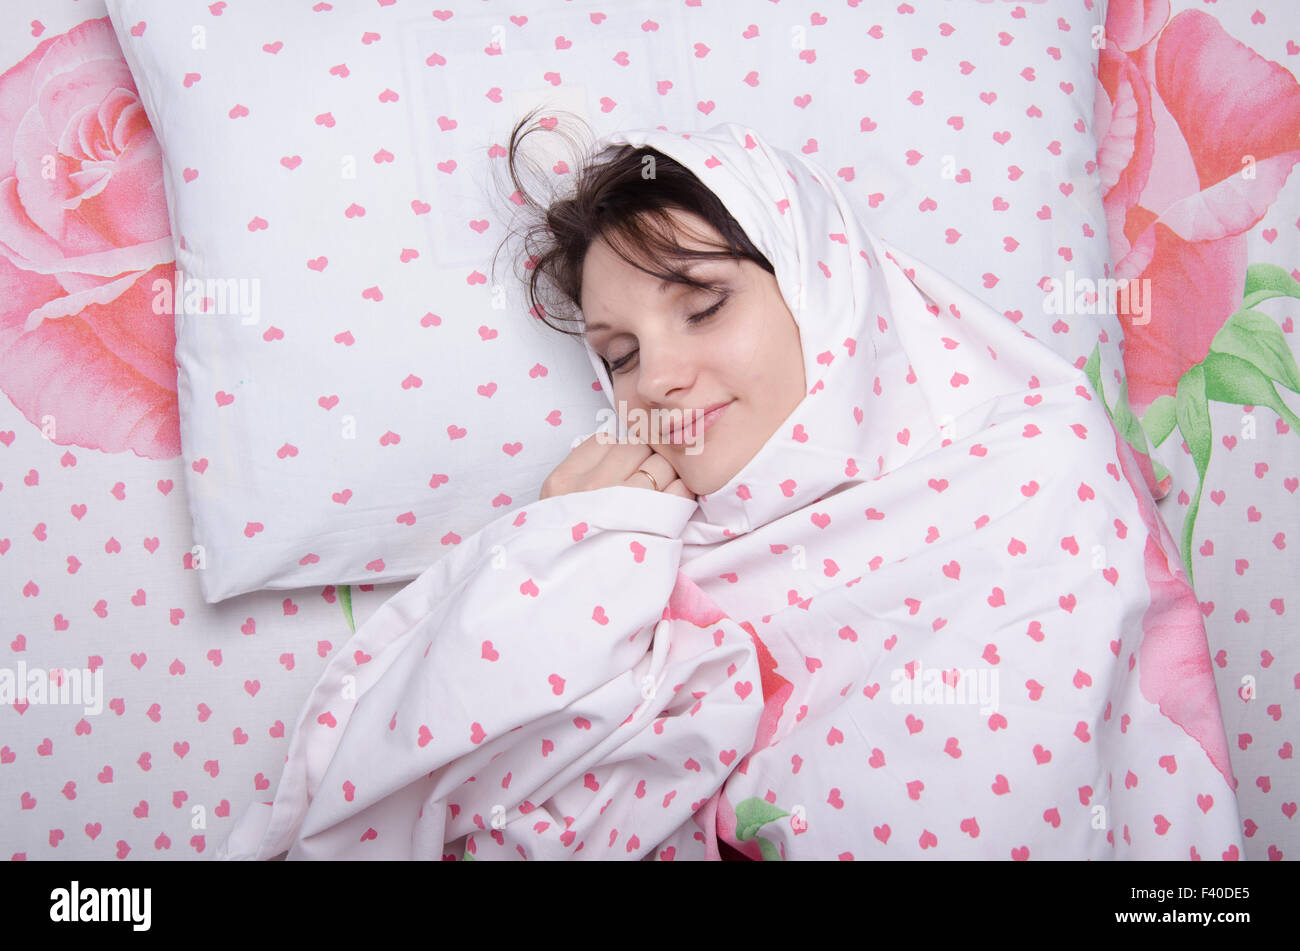 girl wrapped in a blanket Stock Photo